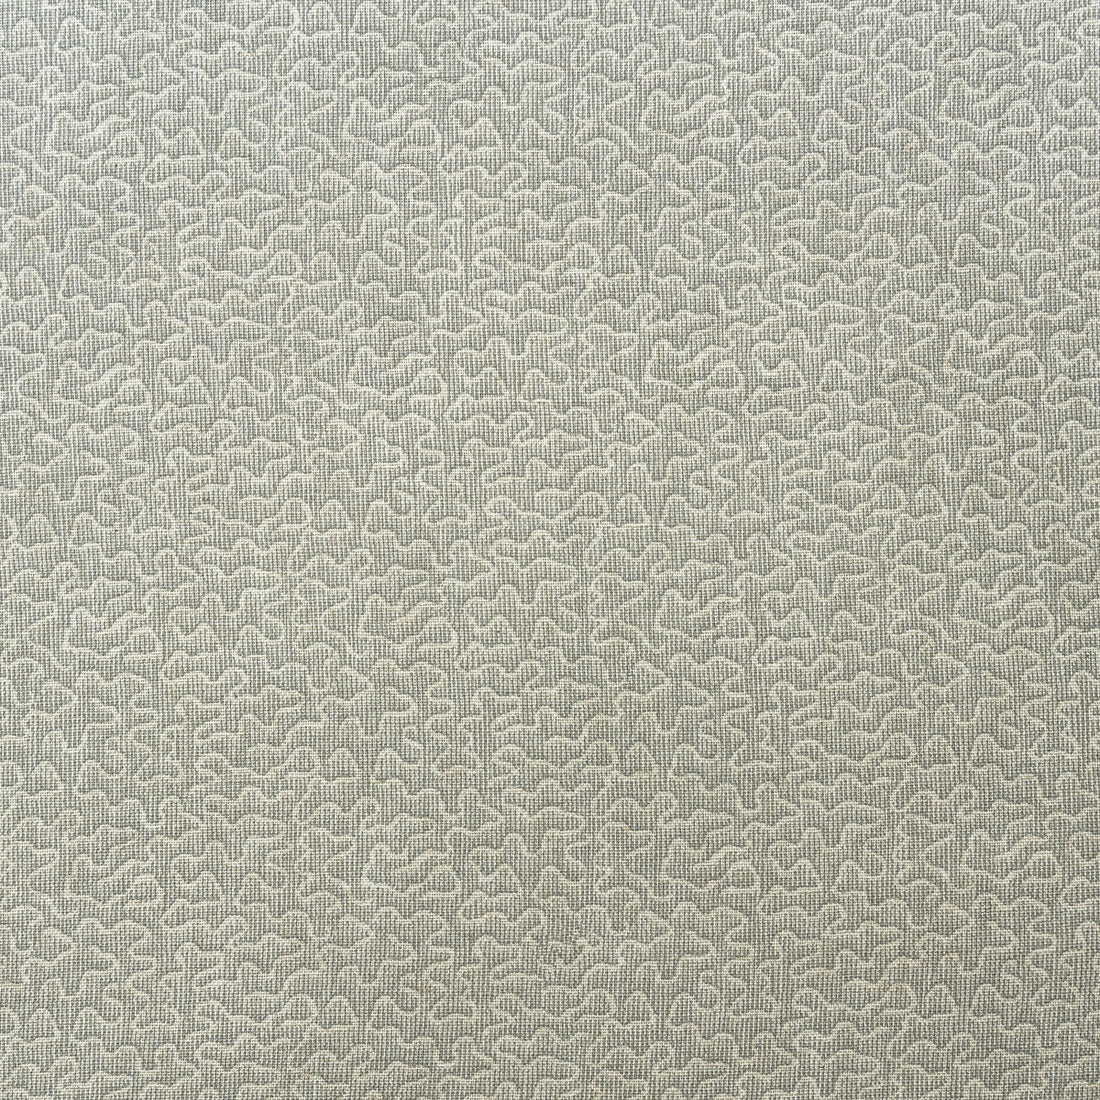 Pollen fabric in cloud color - pattern AM100383.11.0 - by Kravet Couture in the Andrew Martin Garden Path collection